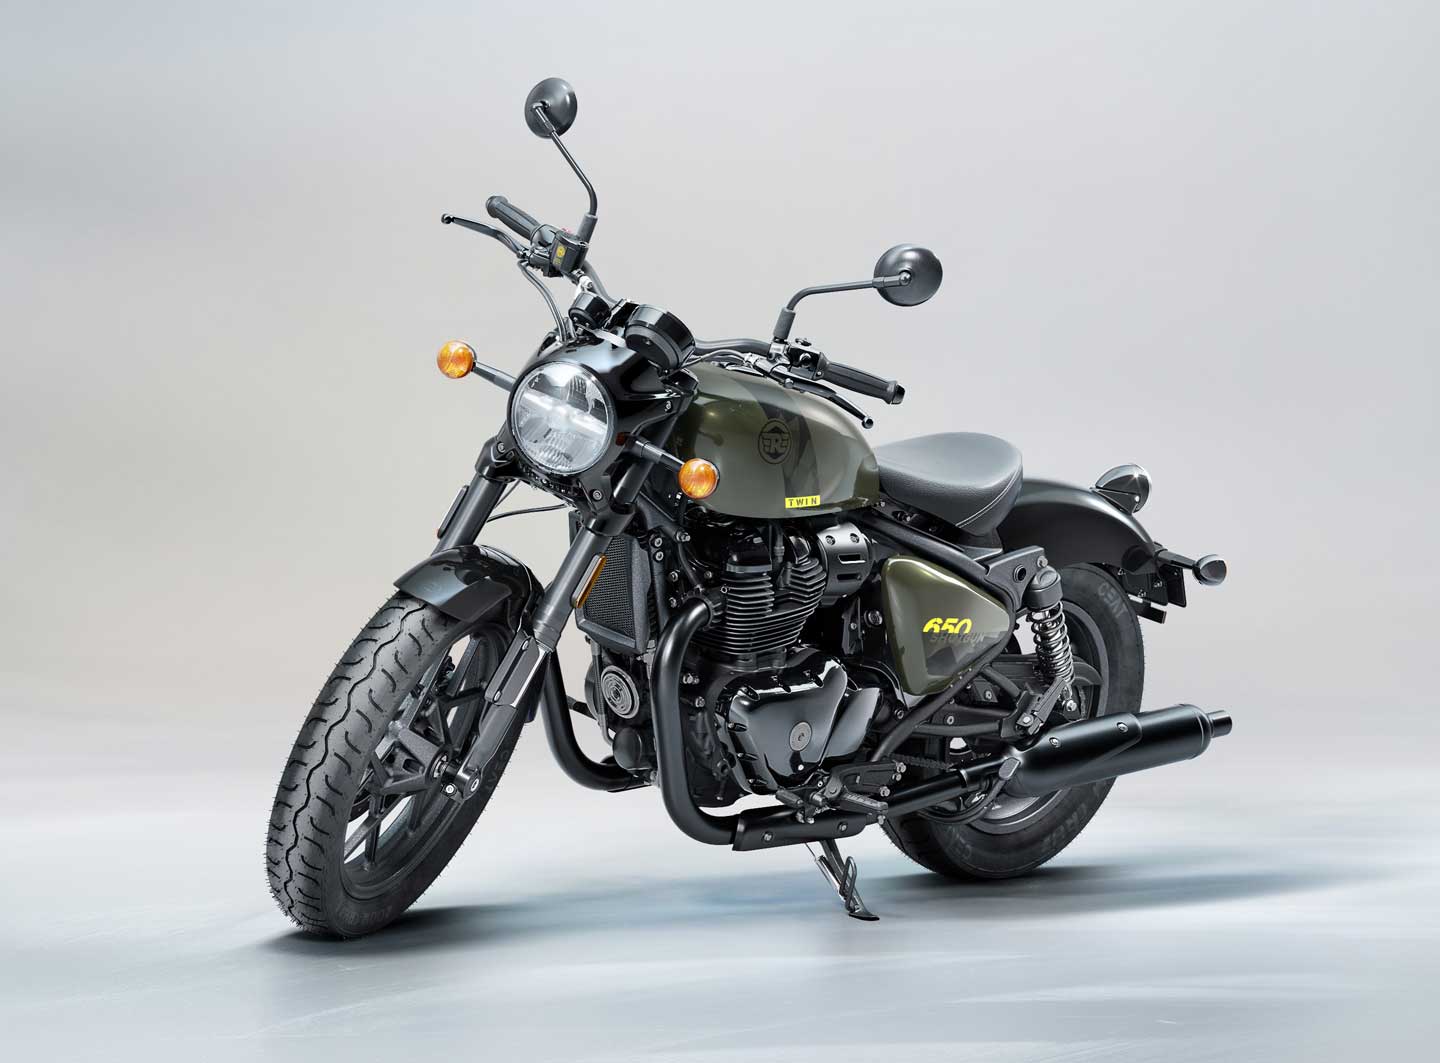 A new Bullet: Royal Enfield SG 650 concept unveiled